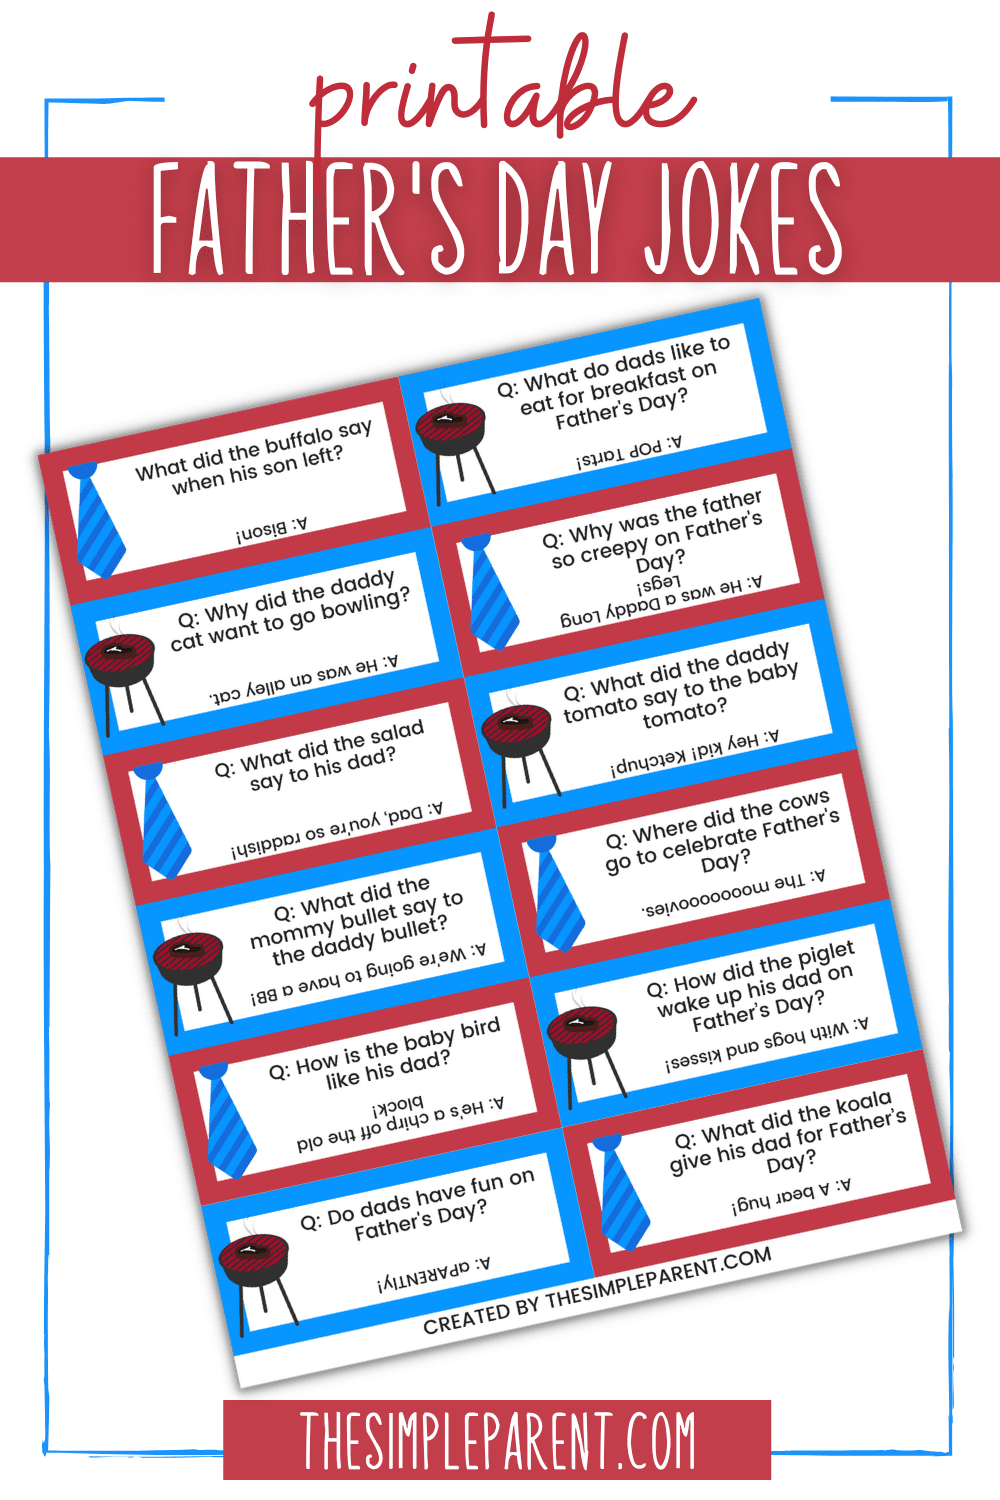 Father's Day jokes on small rectangle cards with blue and red borders, tie and grill clipart